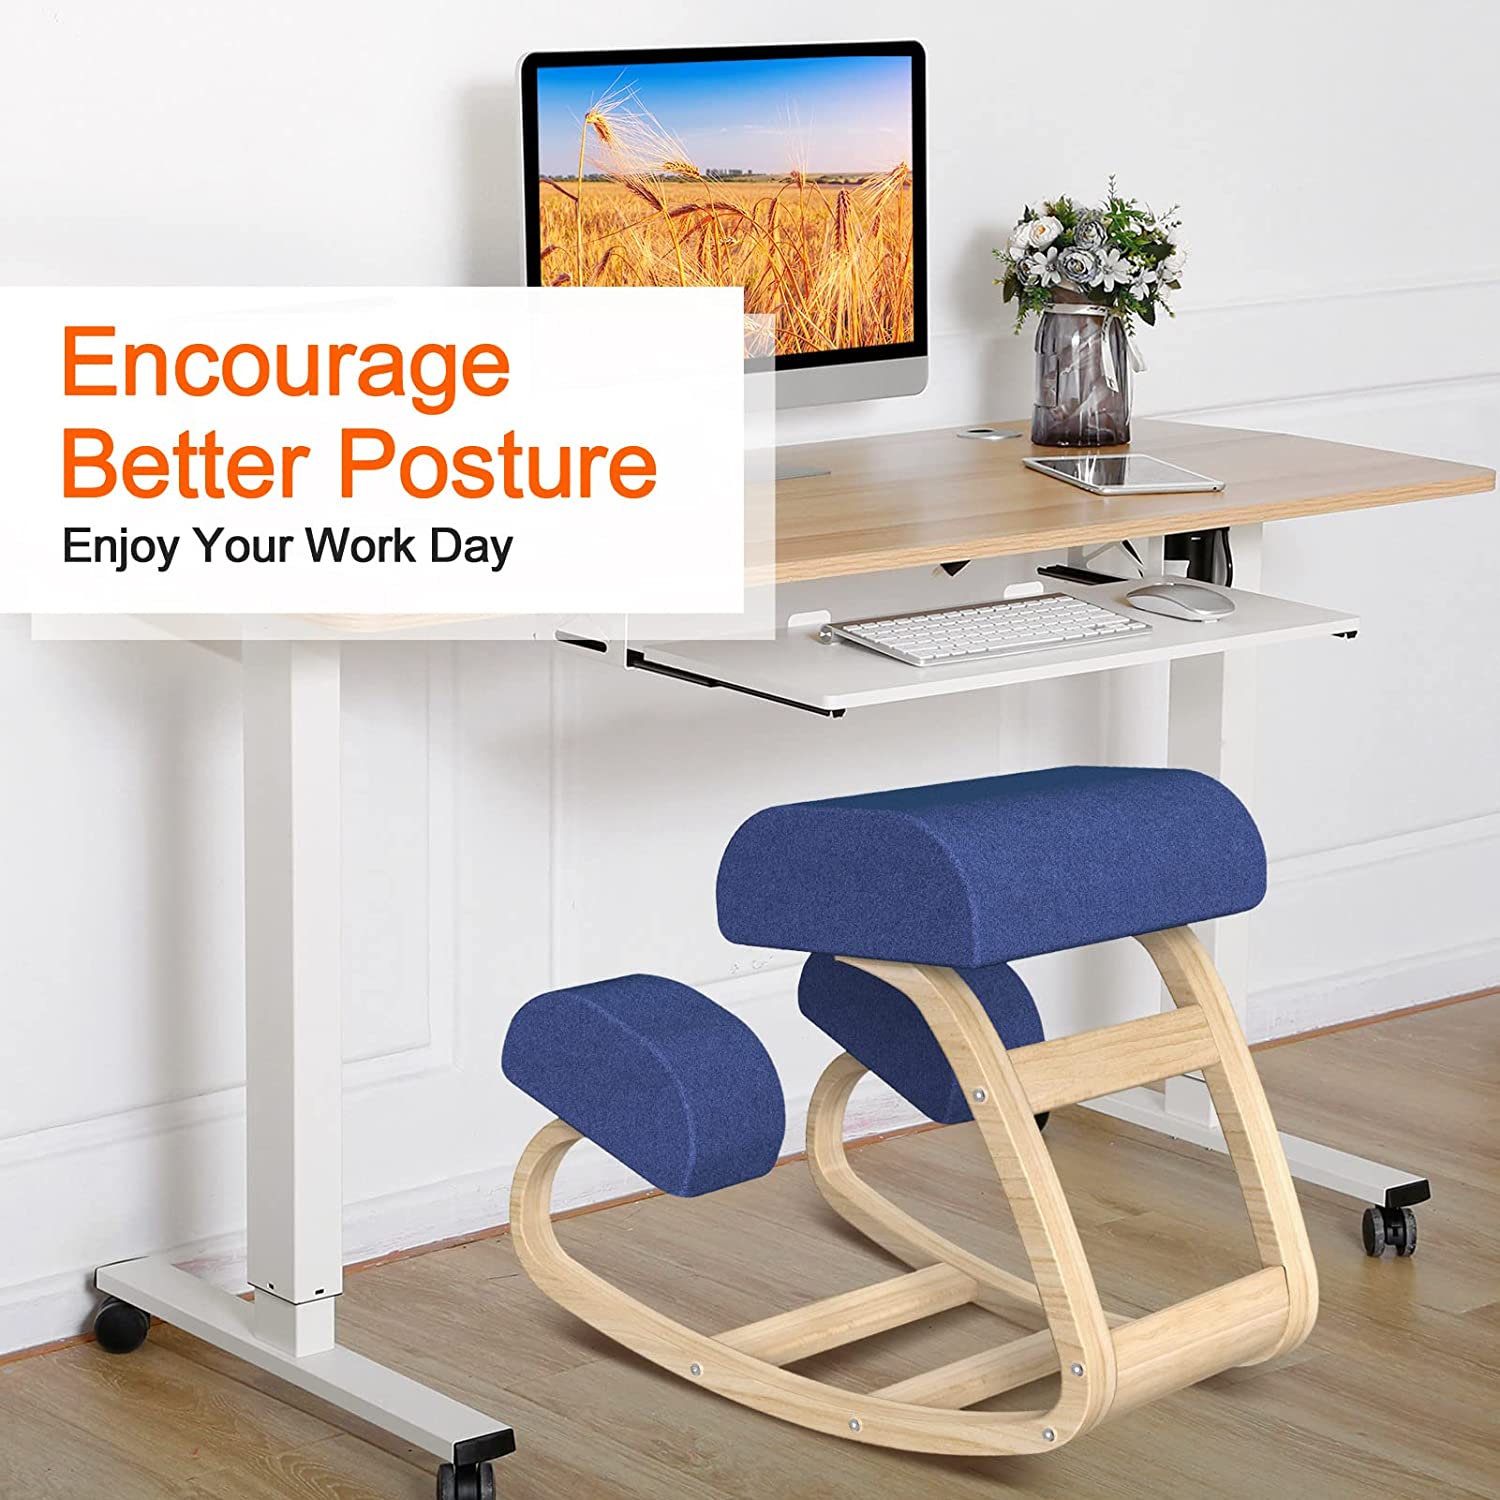 improve posture with a knee chair